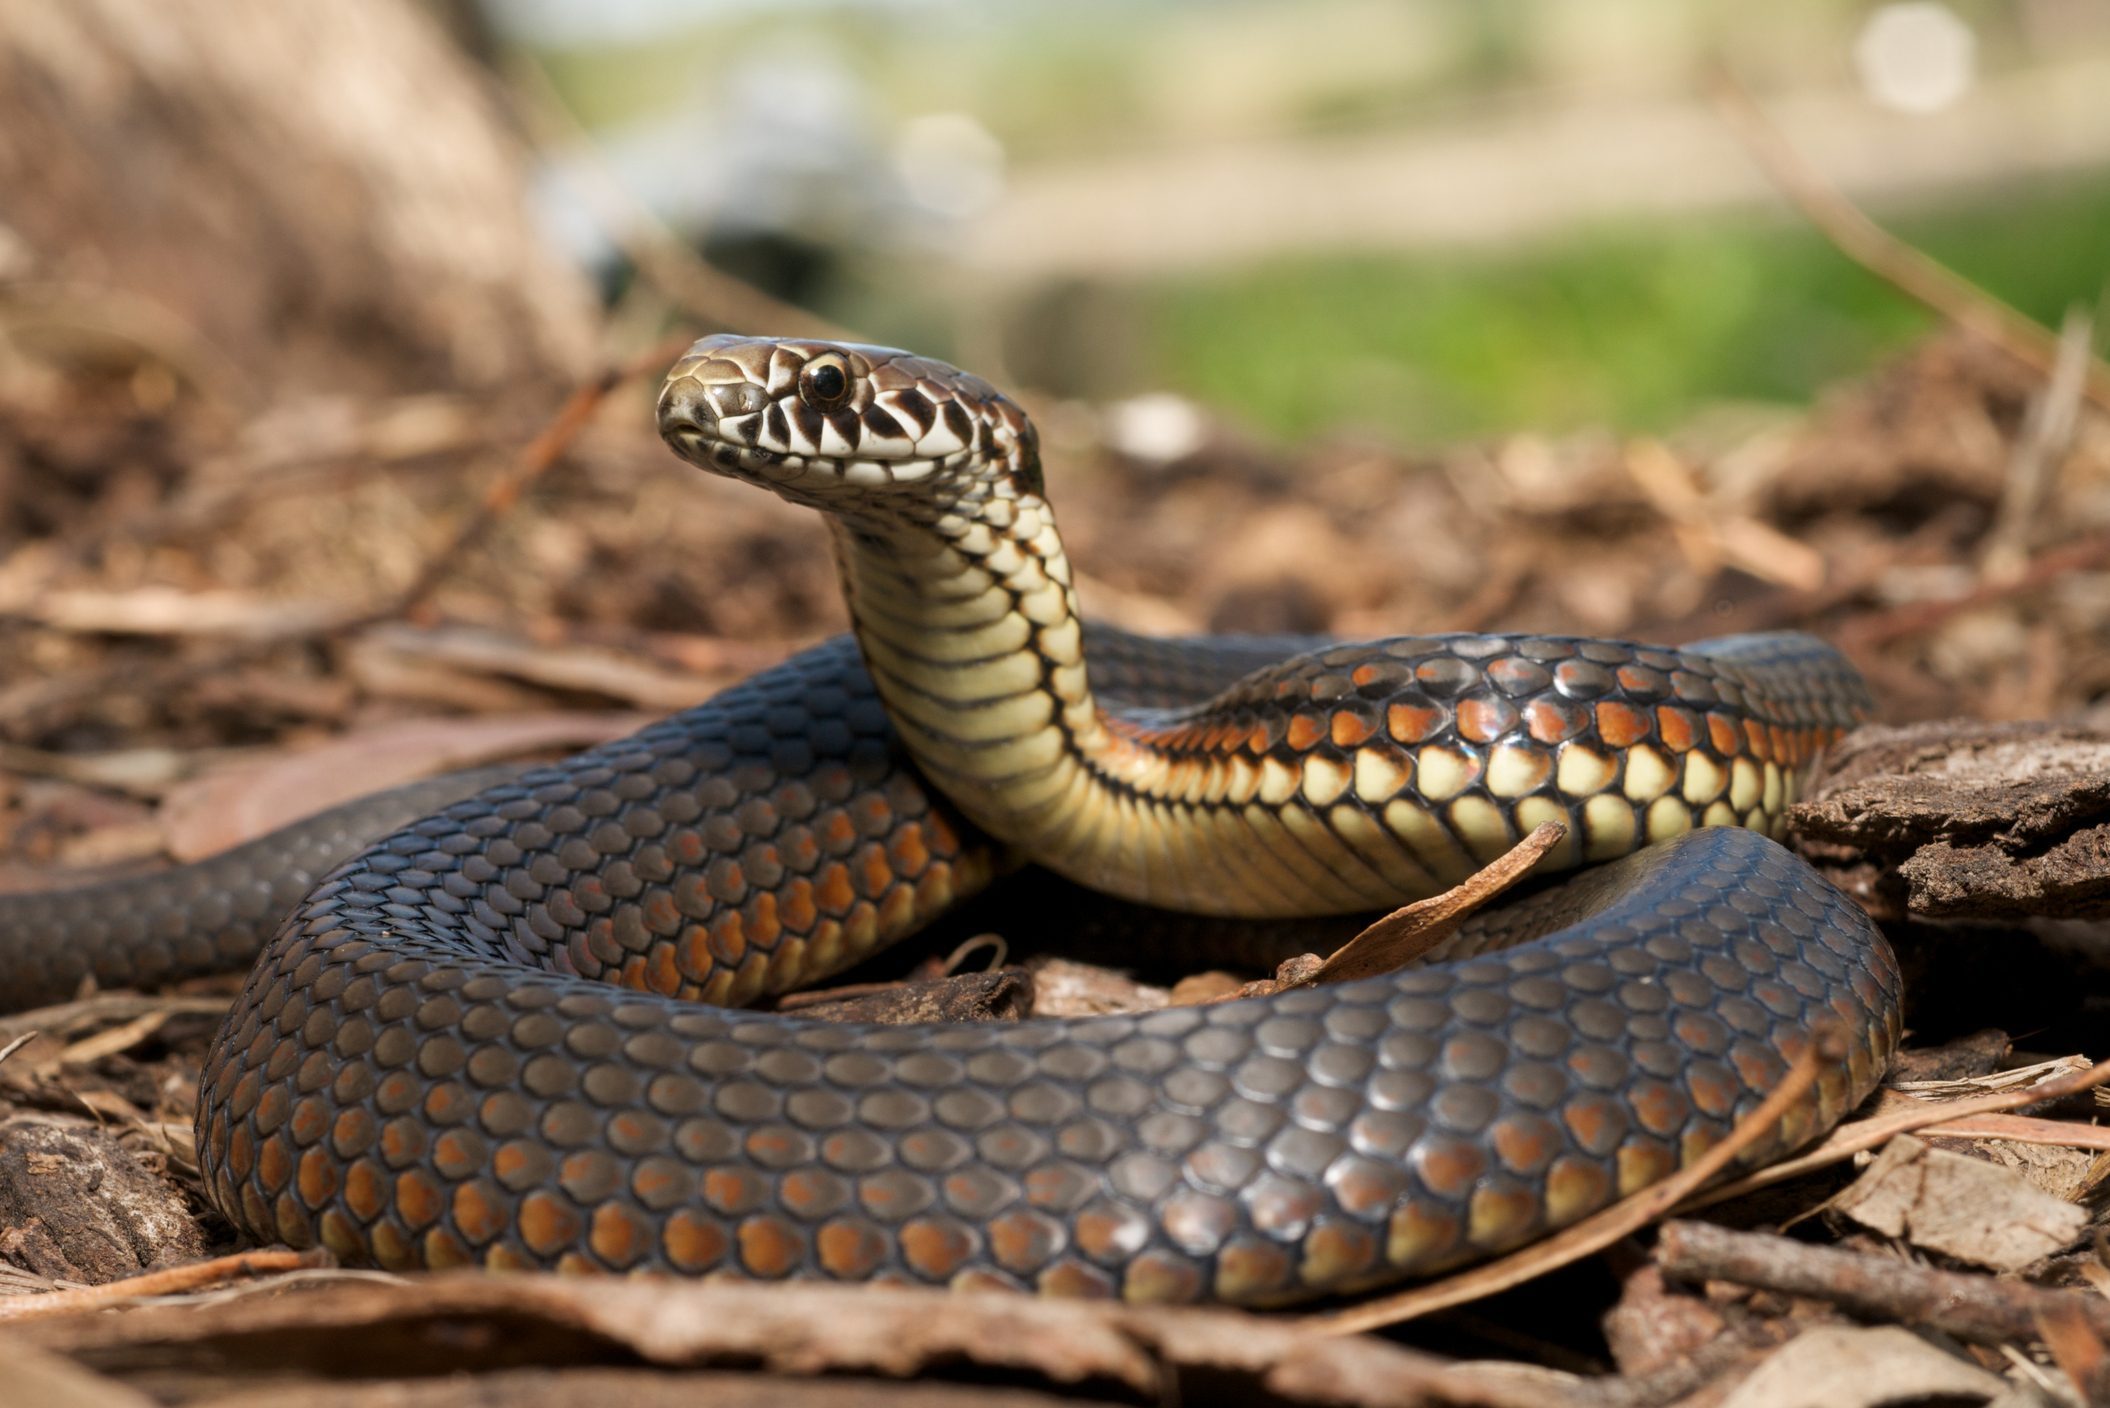 Snake In The Grass: What To Do In Snake Encounter